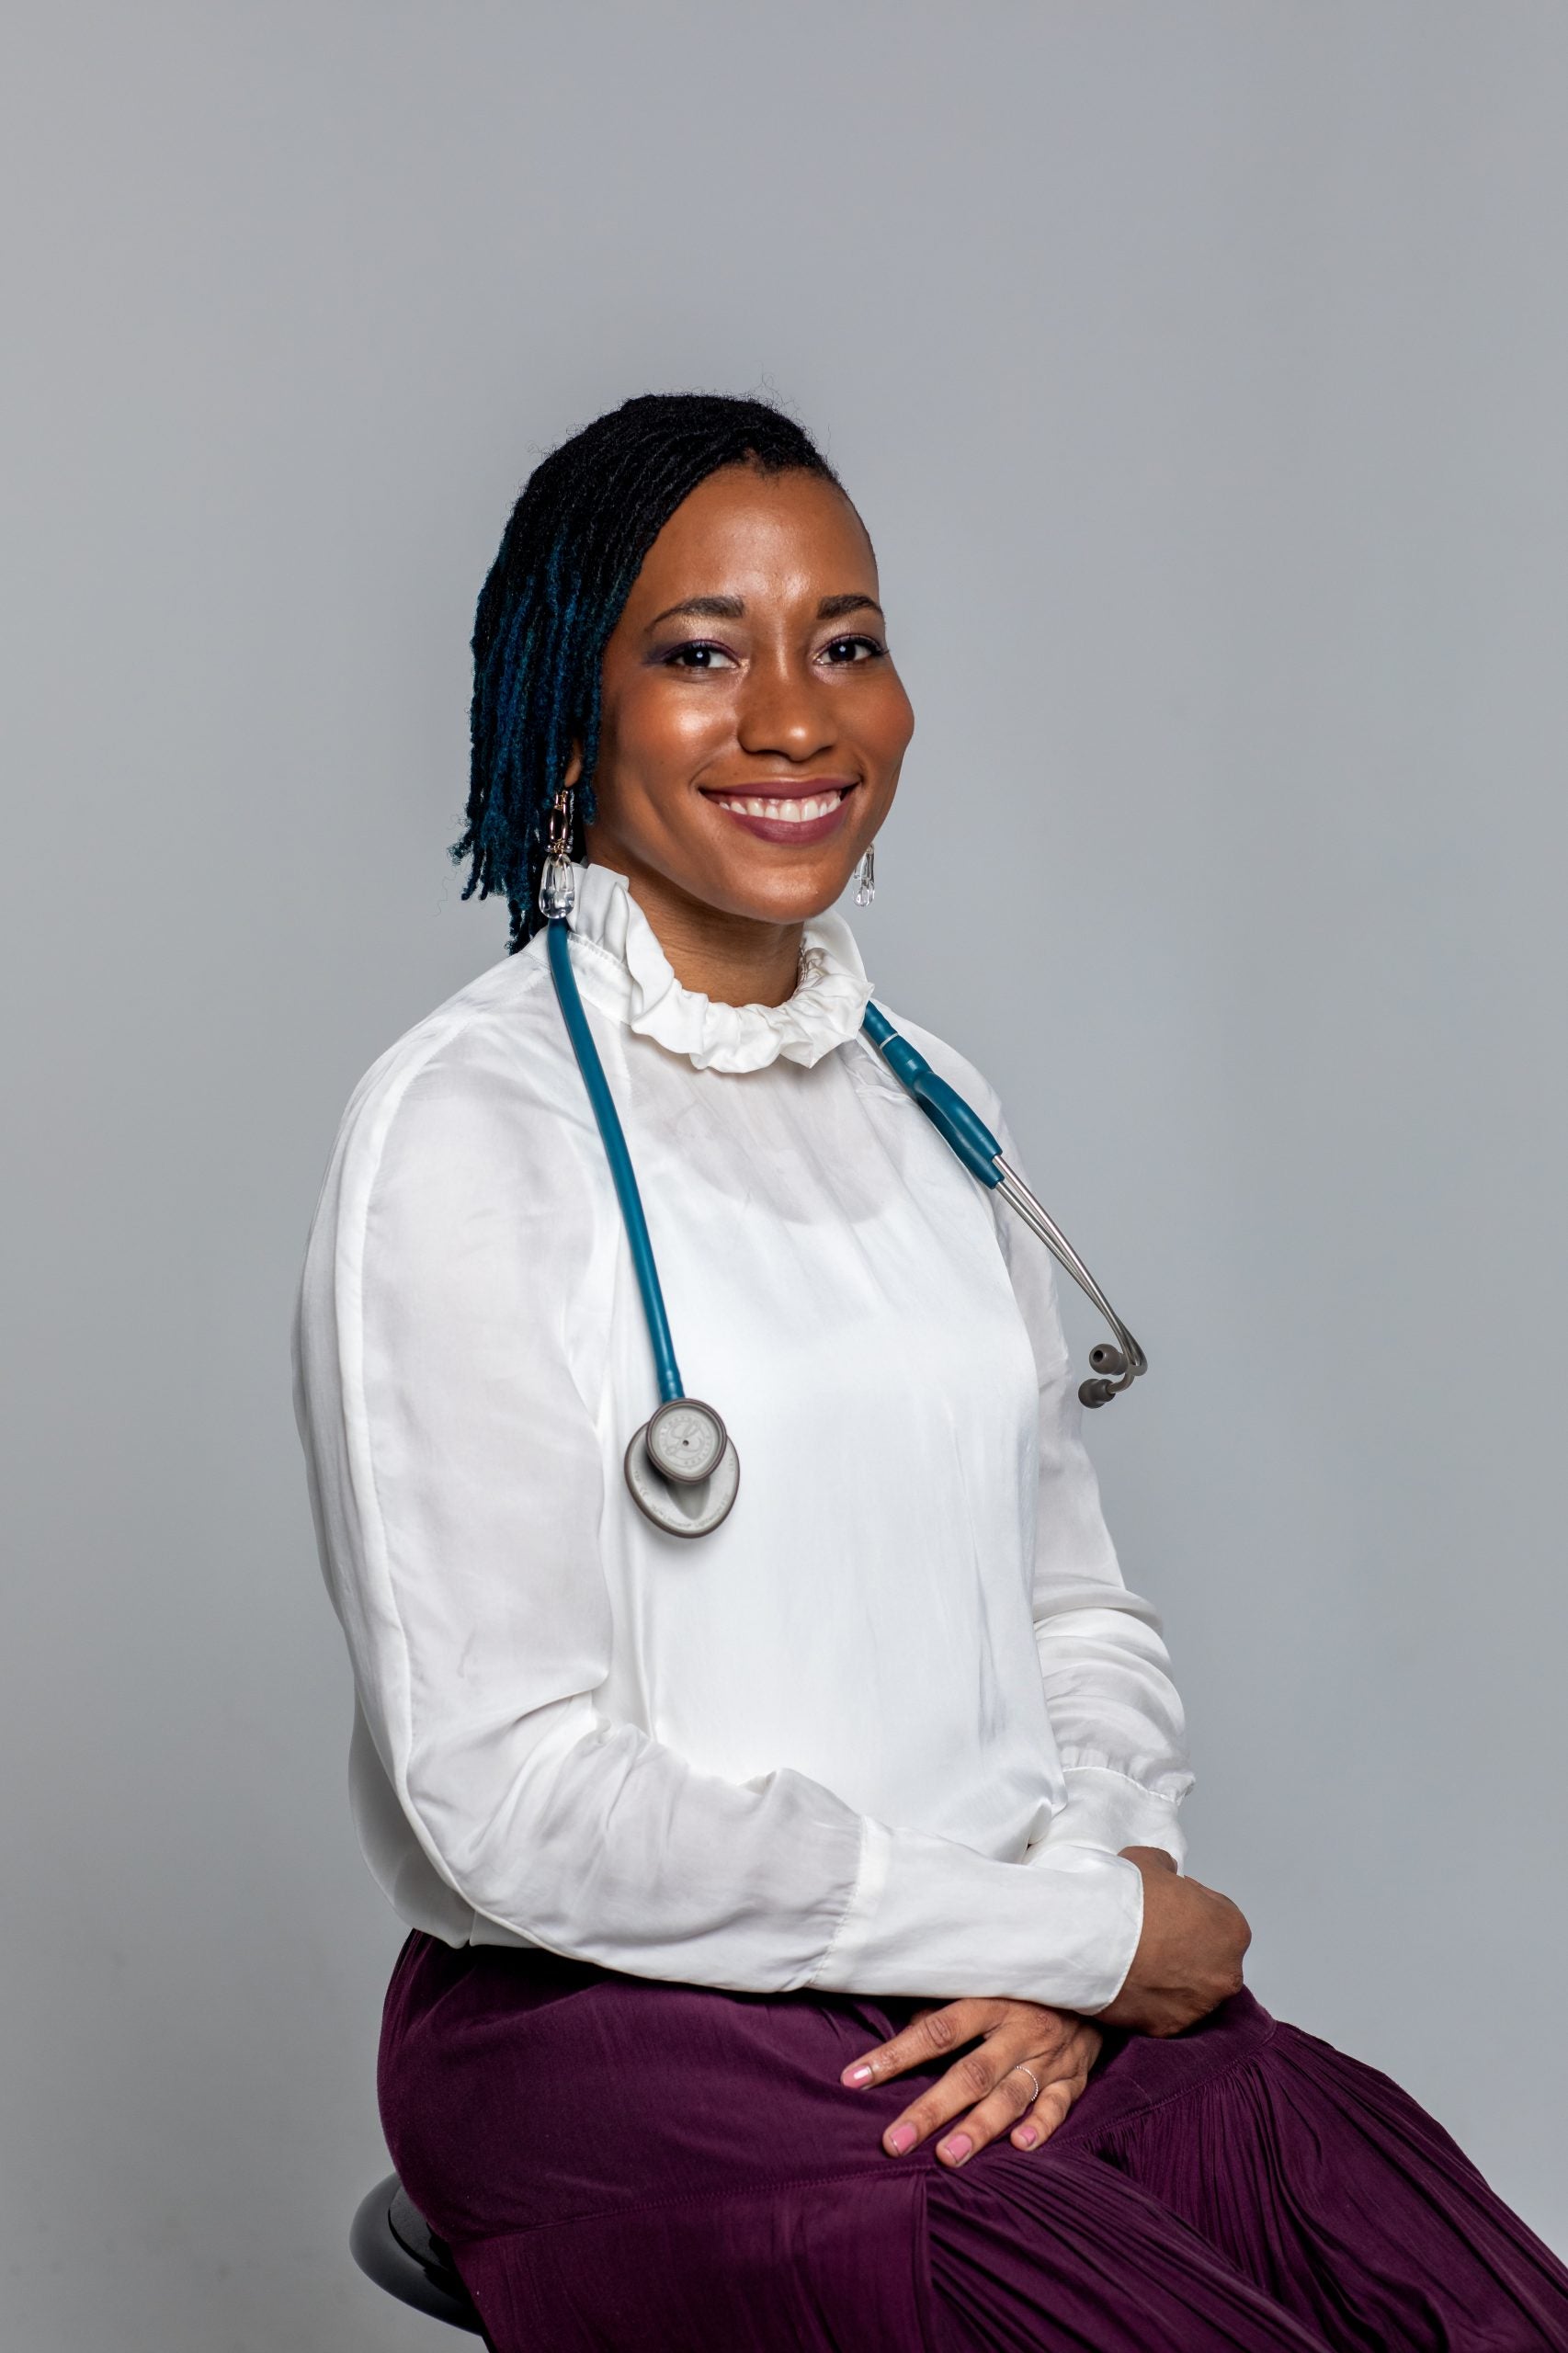 Dr. Candice Fraser Wants To Make Healthcare More Equitable For Everyone